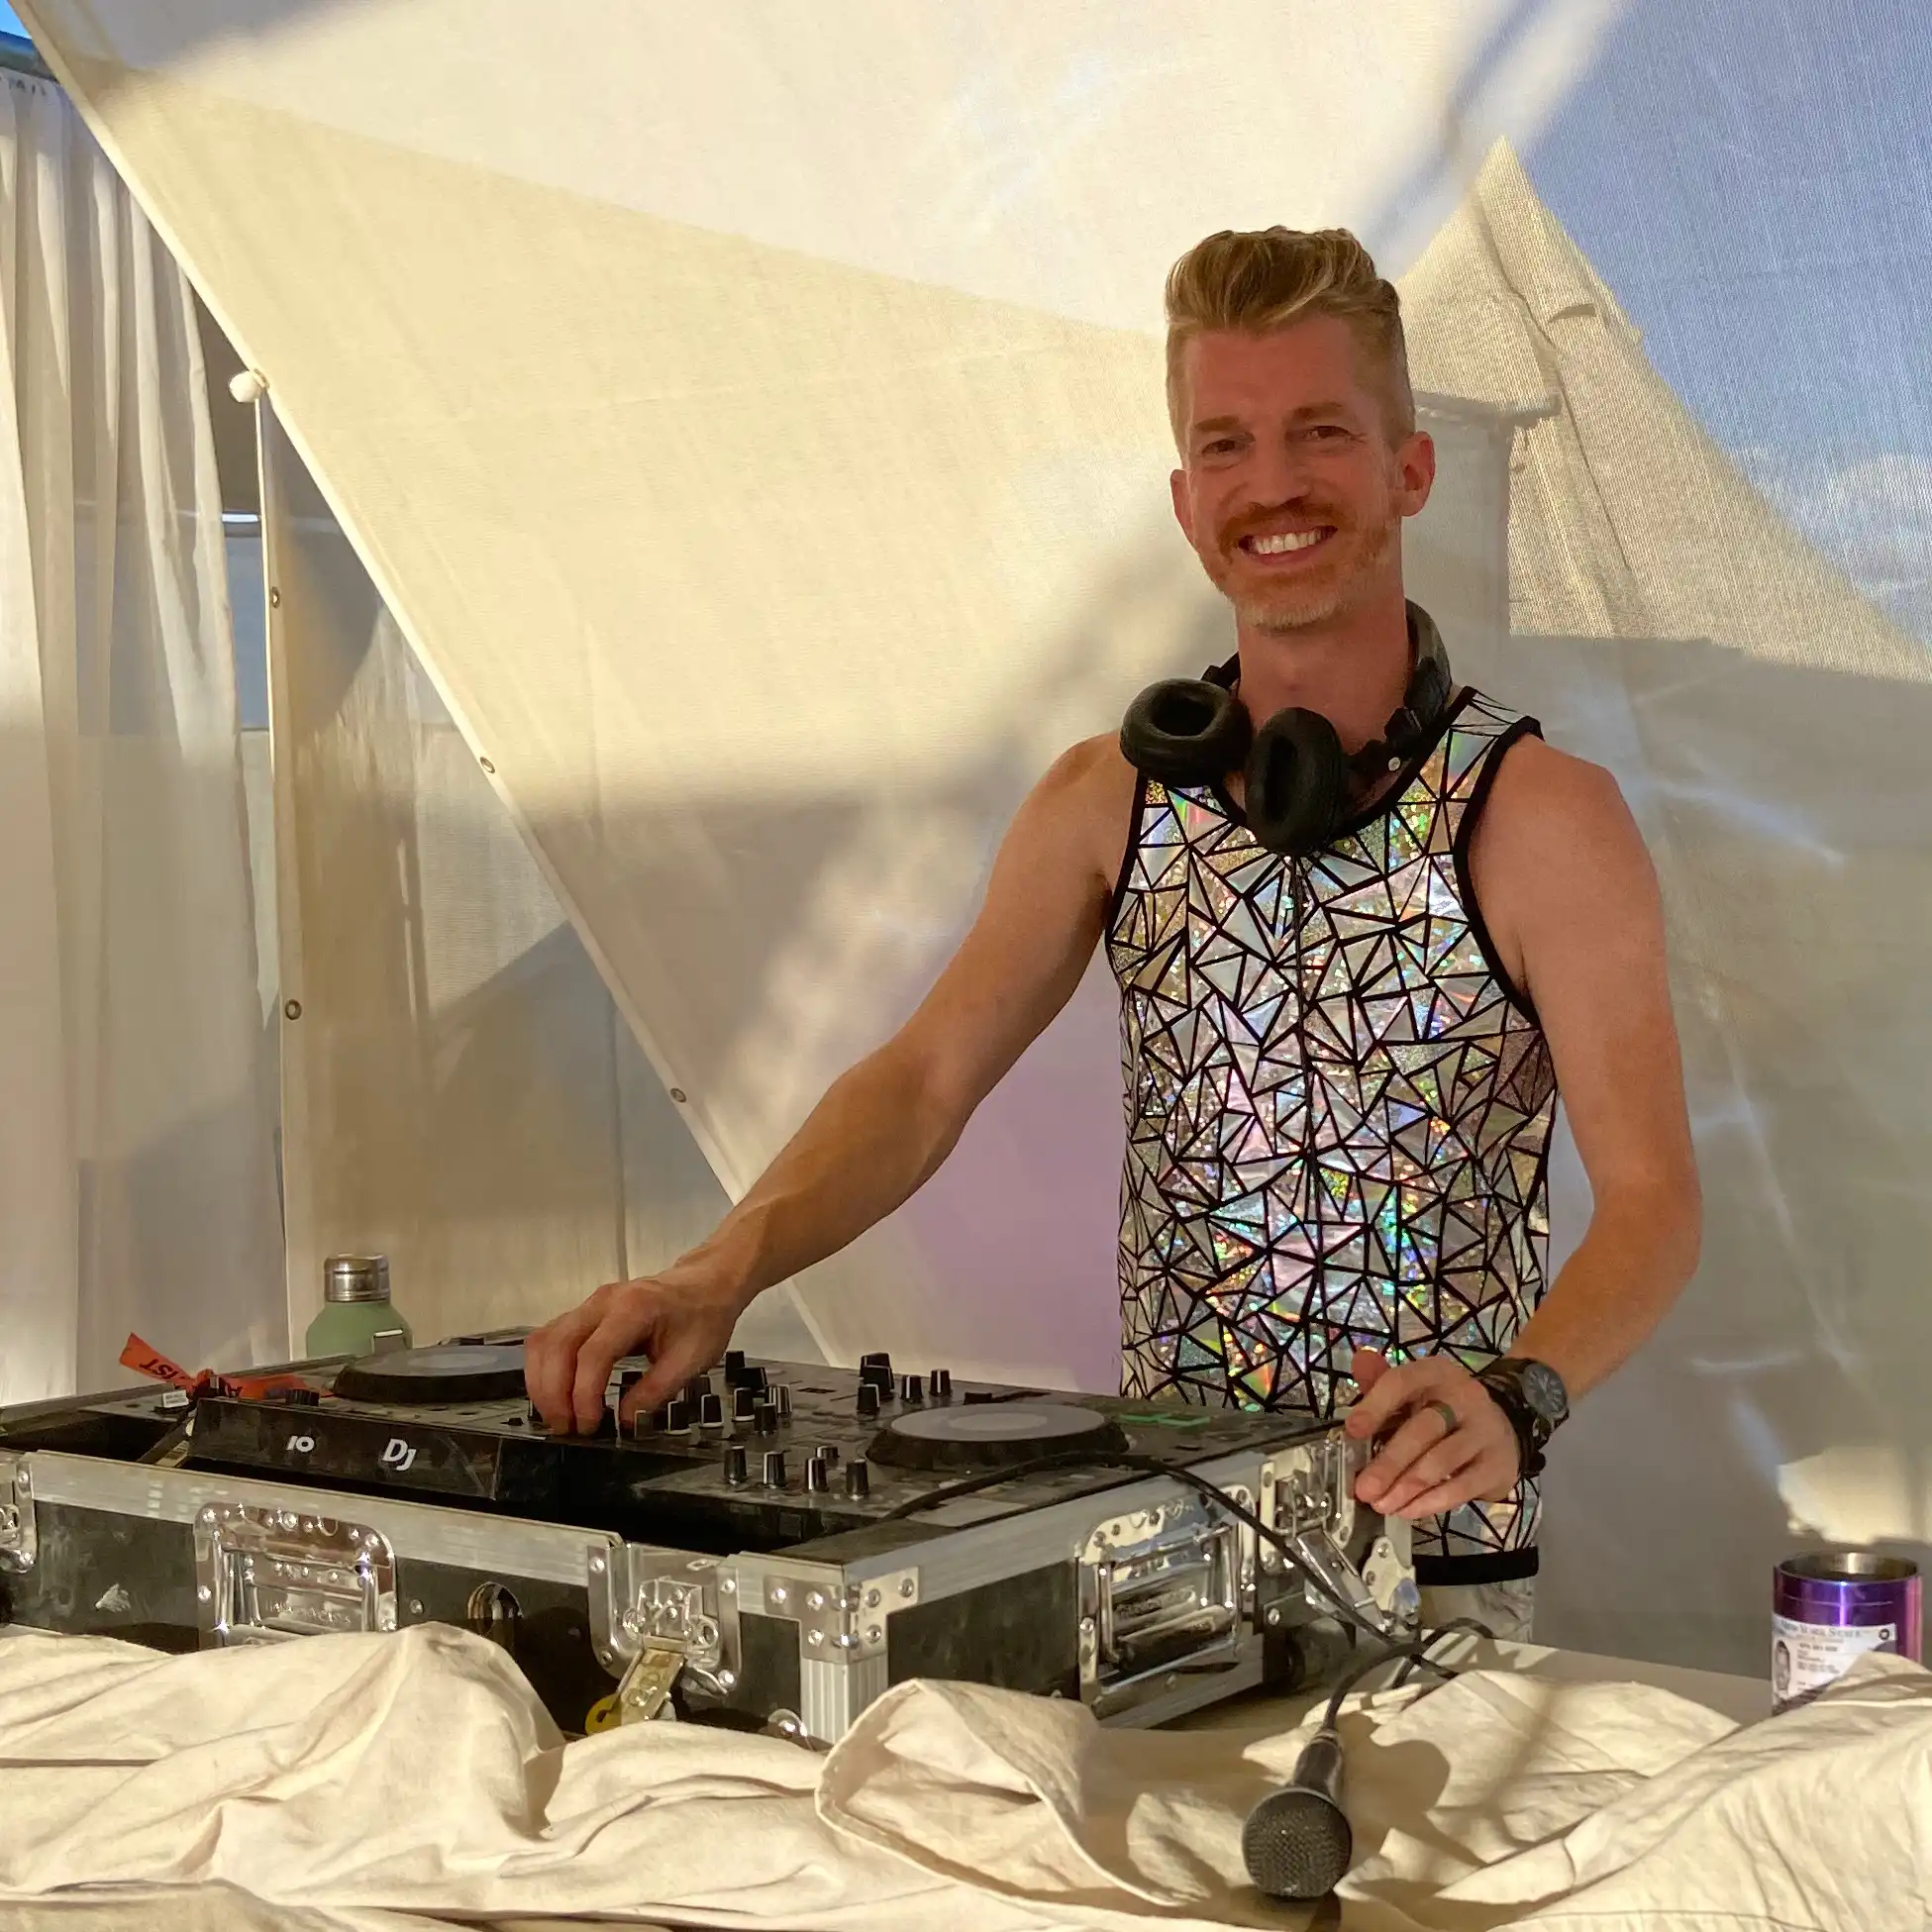 A disc jockey plays music and smiles for the camera. He is wearing a sleeveless, shiny metallic space age tank top made up of small flourescent triangles, a chunky camping watch and headphones around his neck. Behind him you can see a bell-shaped tent.